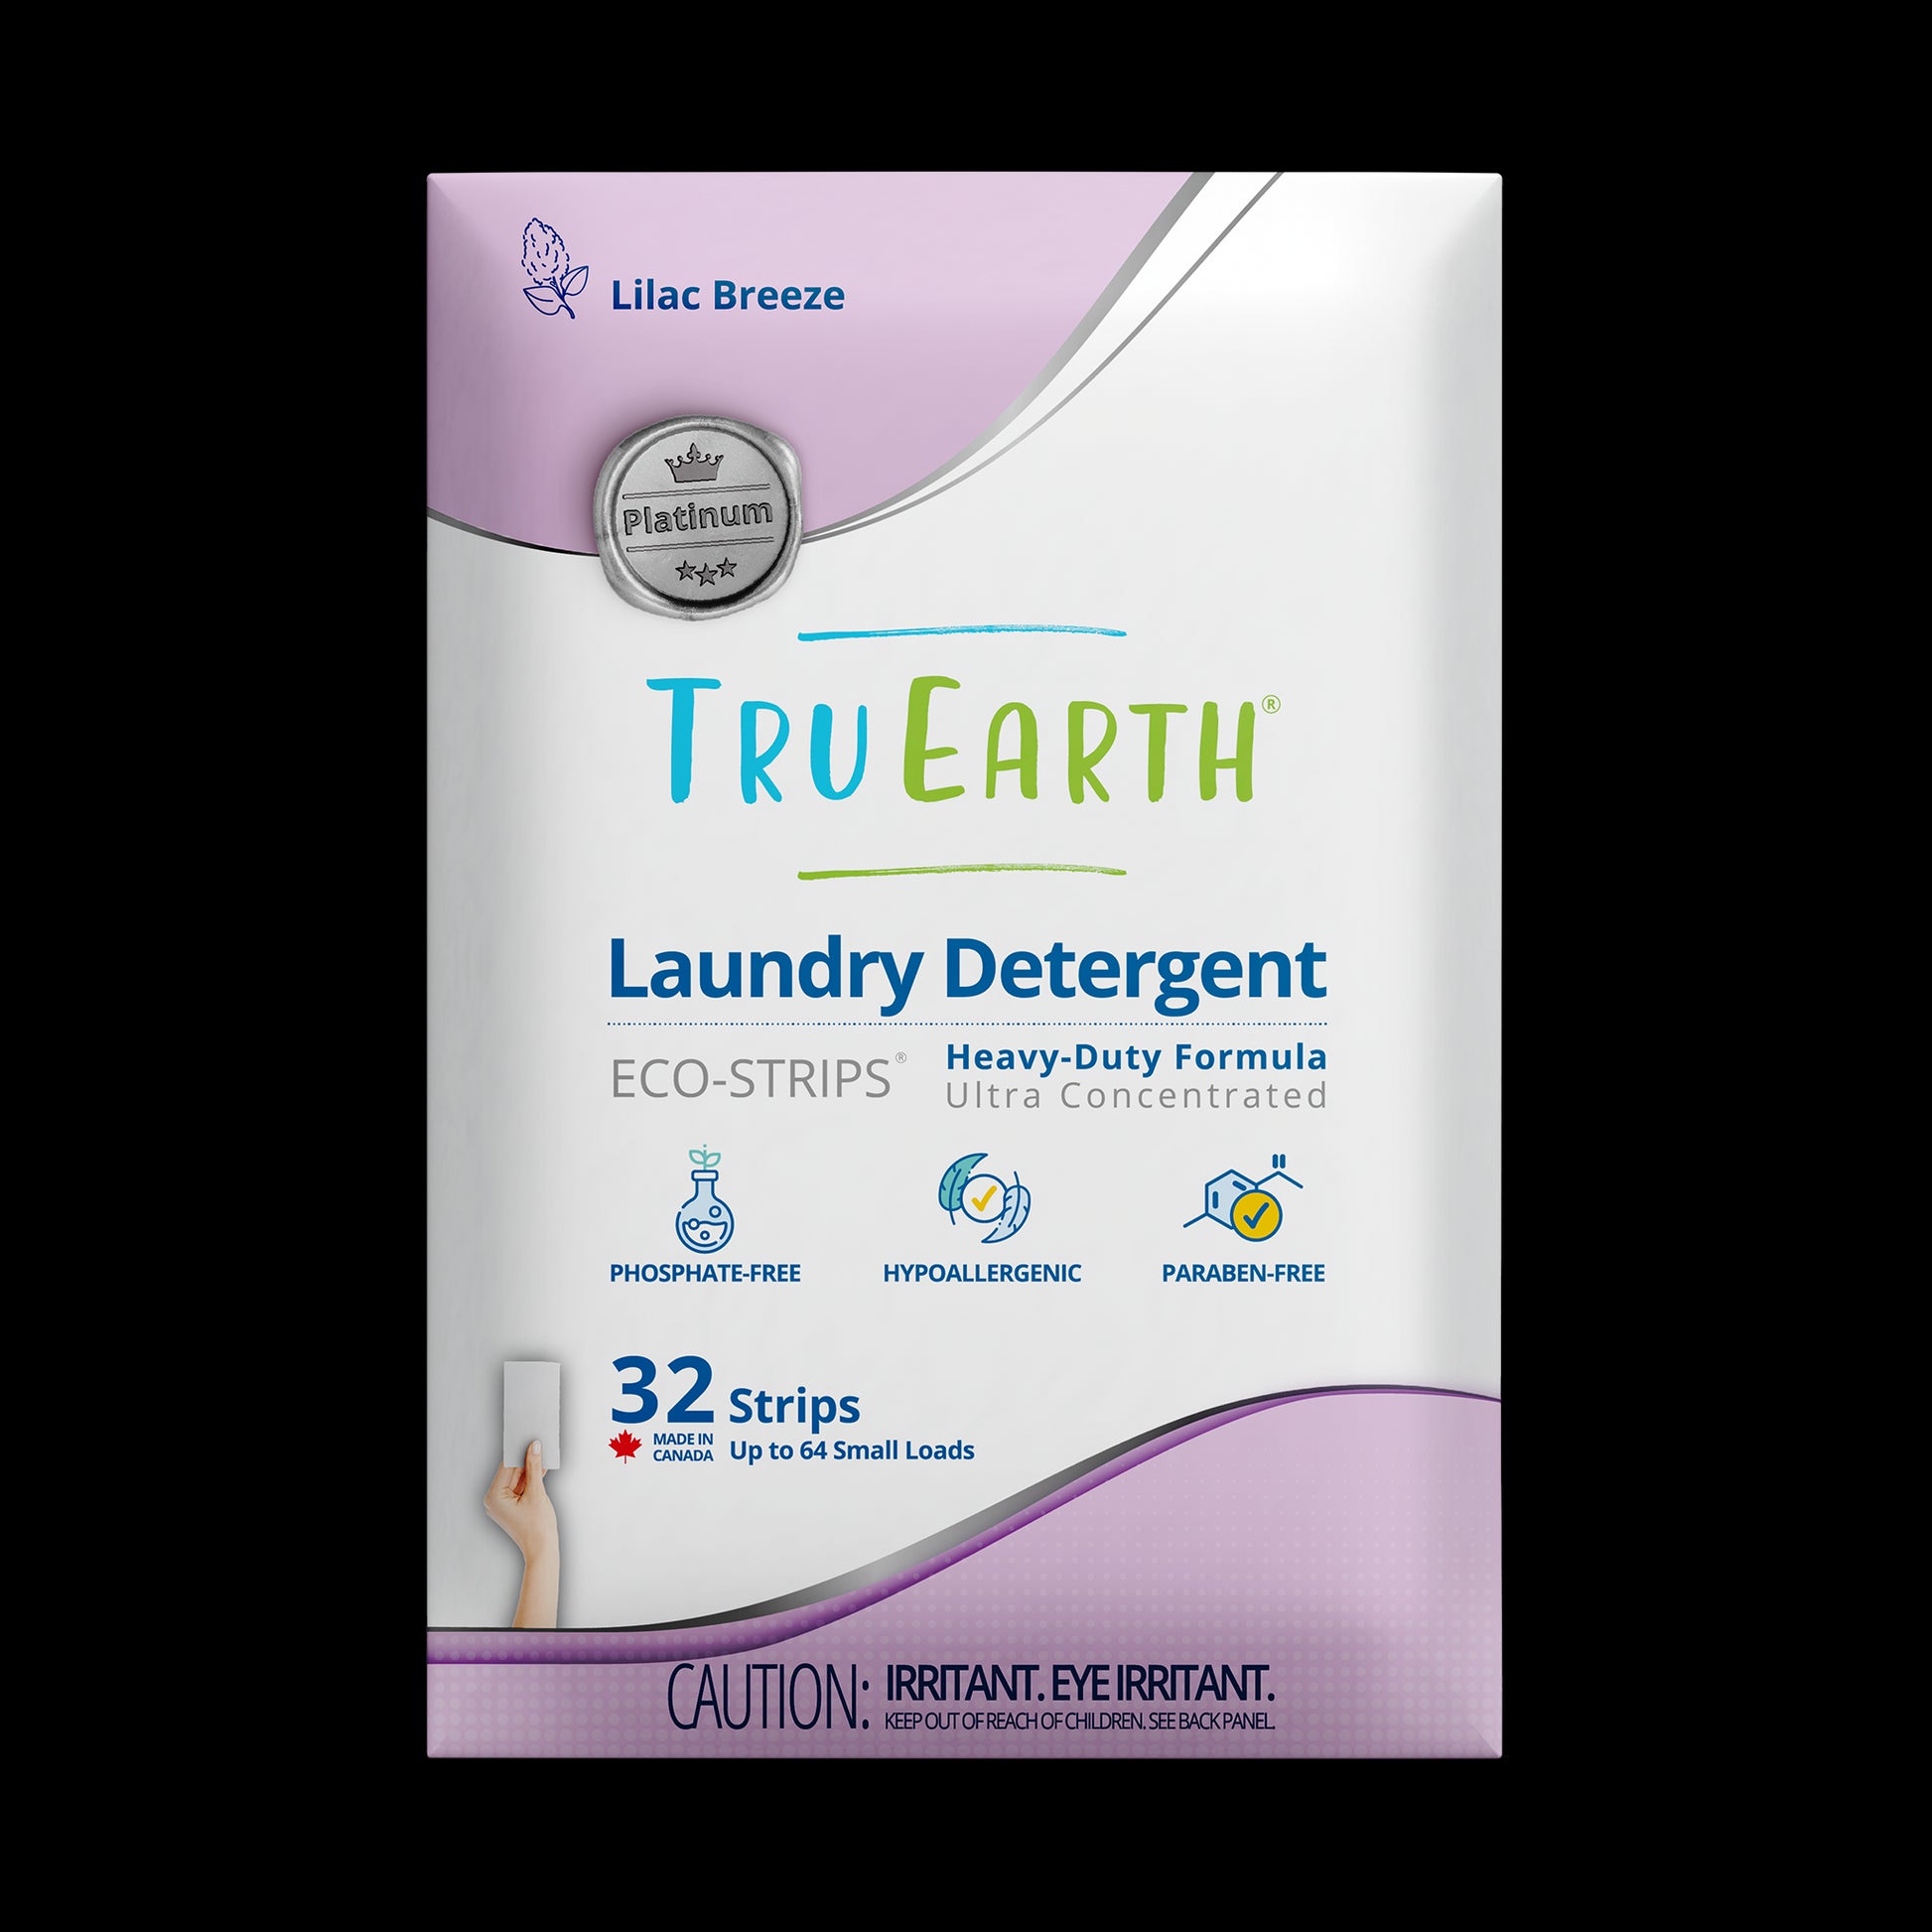 TruEarth Platinum Laundry Detergent Lilac Breeze Front of Package